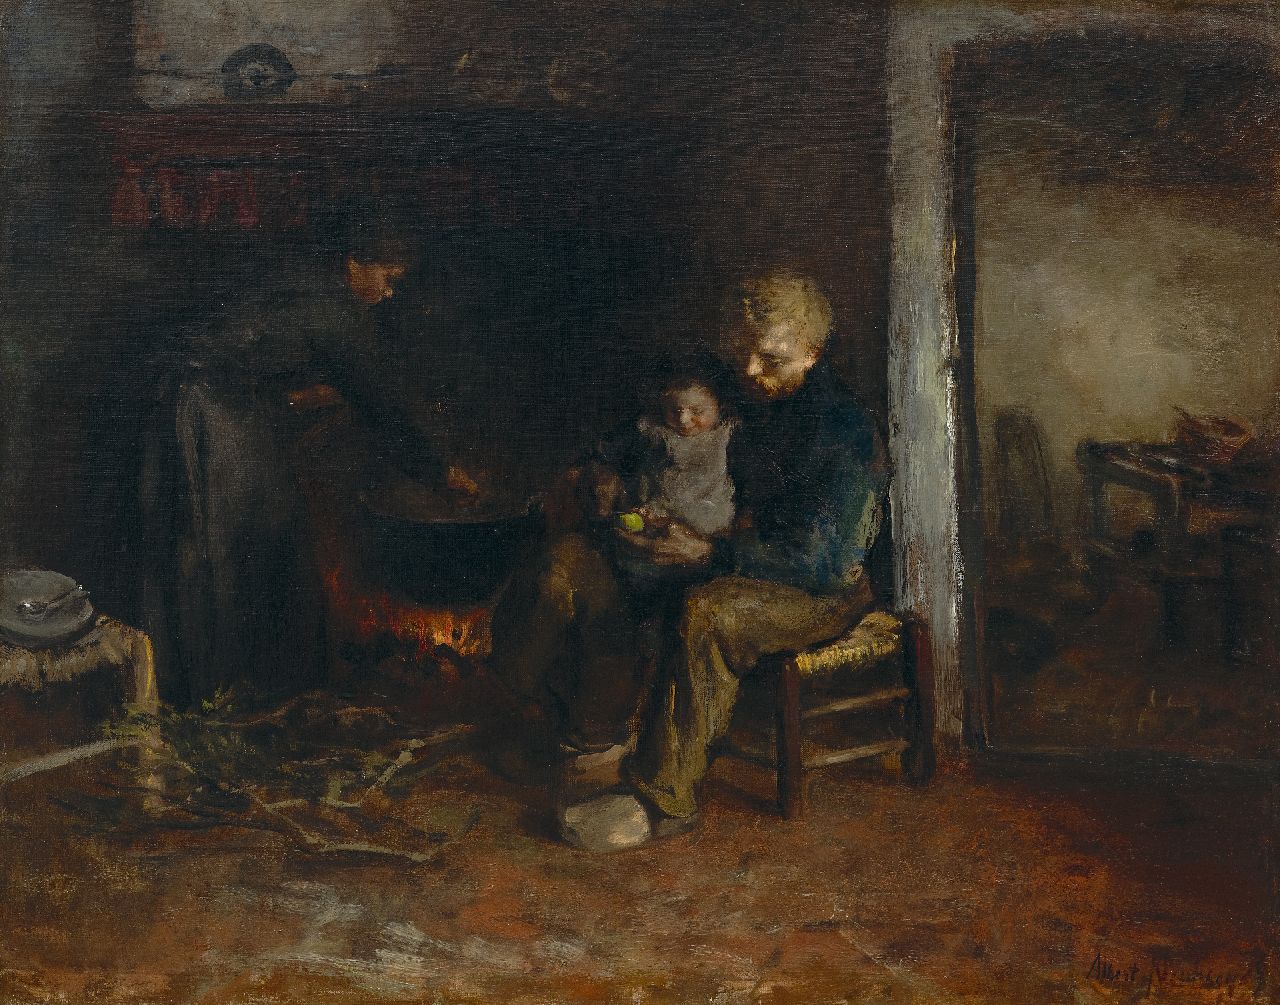 Neuhuys J.A.  | Johannes 'Albert' Neuhuys | Paintings offered for sale | Peasant familie, oil on canvas 51.0 x 60.3 cm, signed l.r.